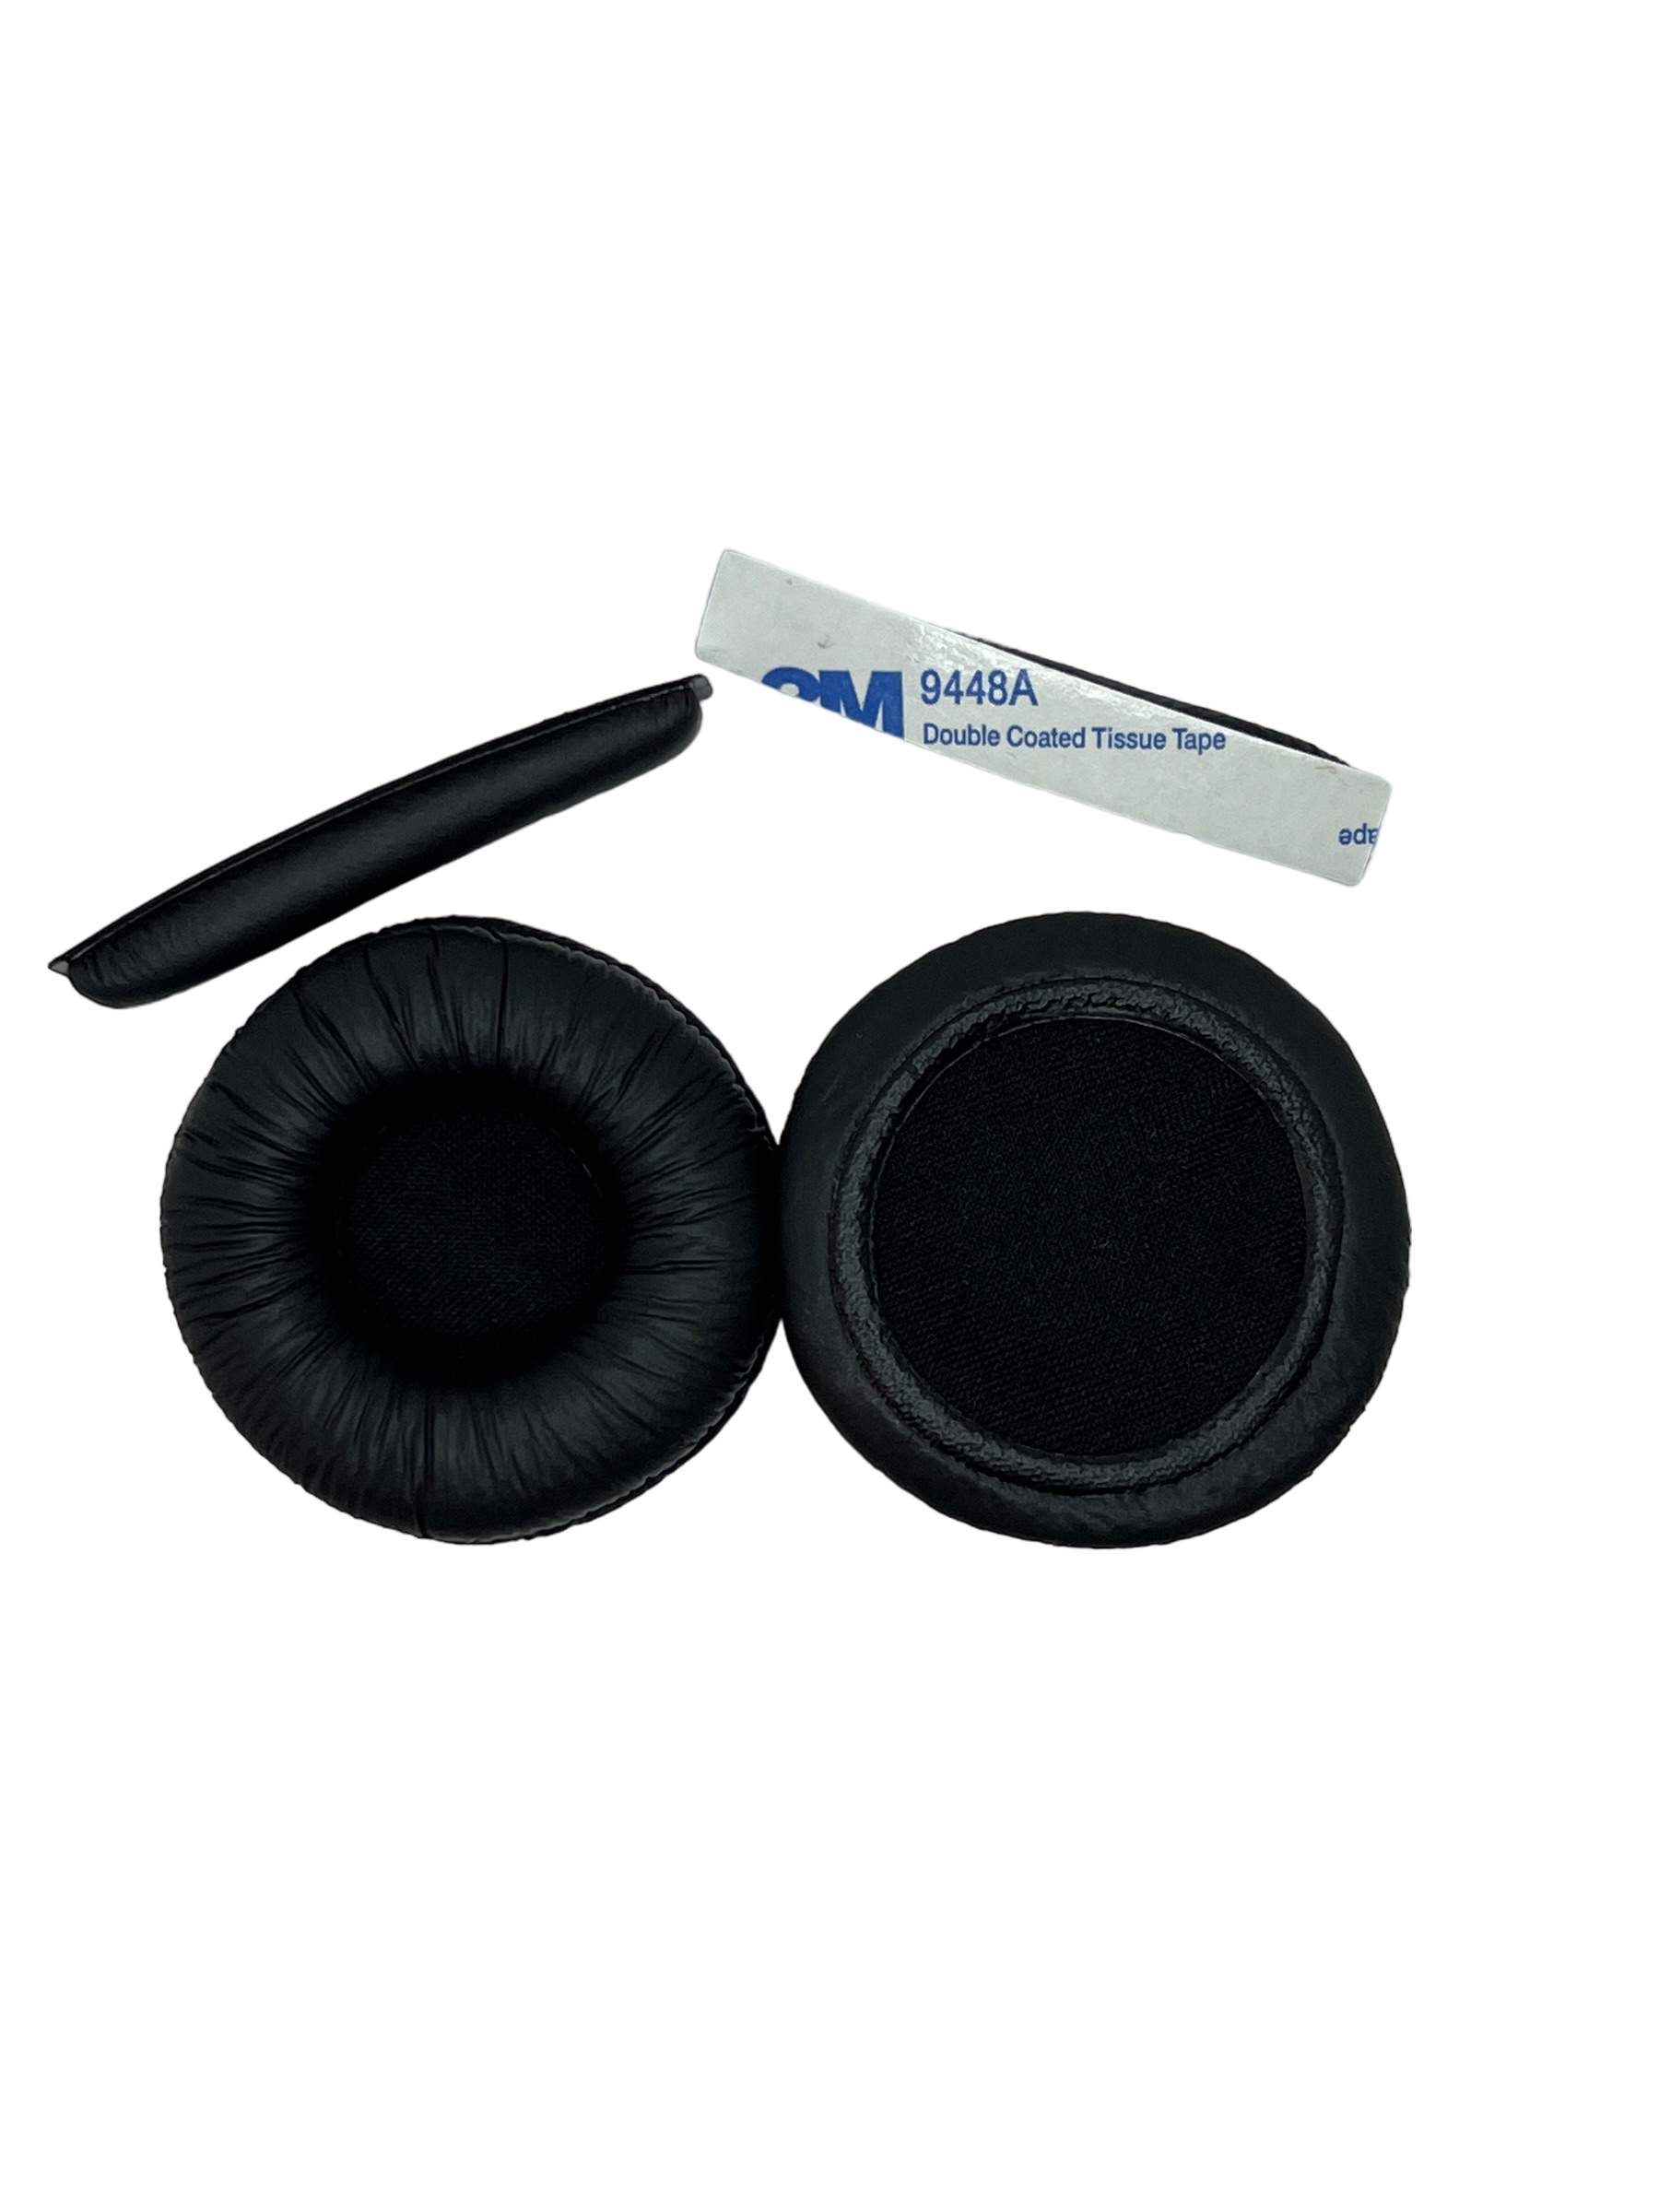 Sennheiser PX200 PX80 PC36 PX100 PMX100 PMX200 PXC300 Ear Pad and Headband Cushion Replacements - CentralSound